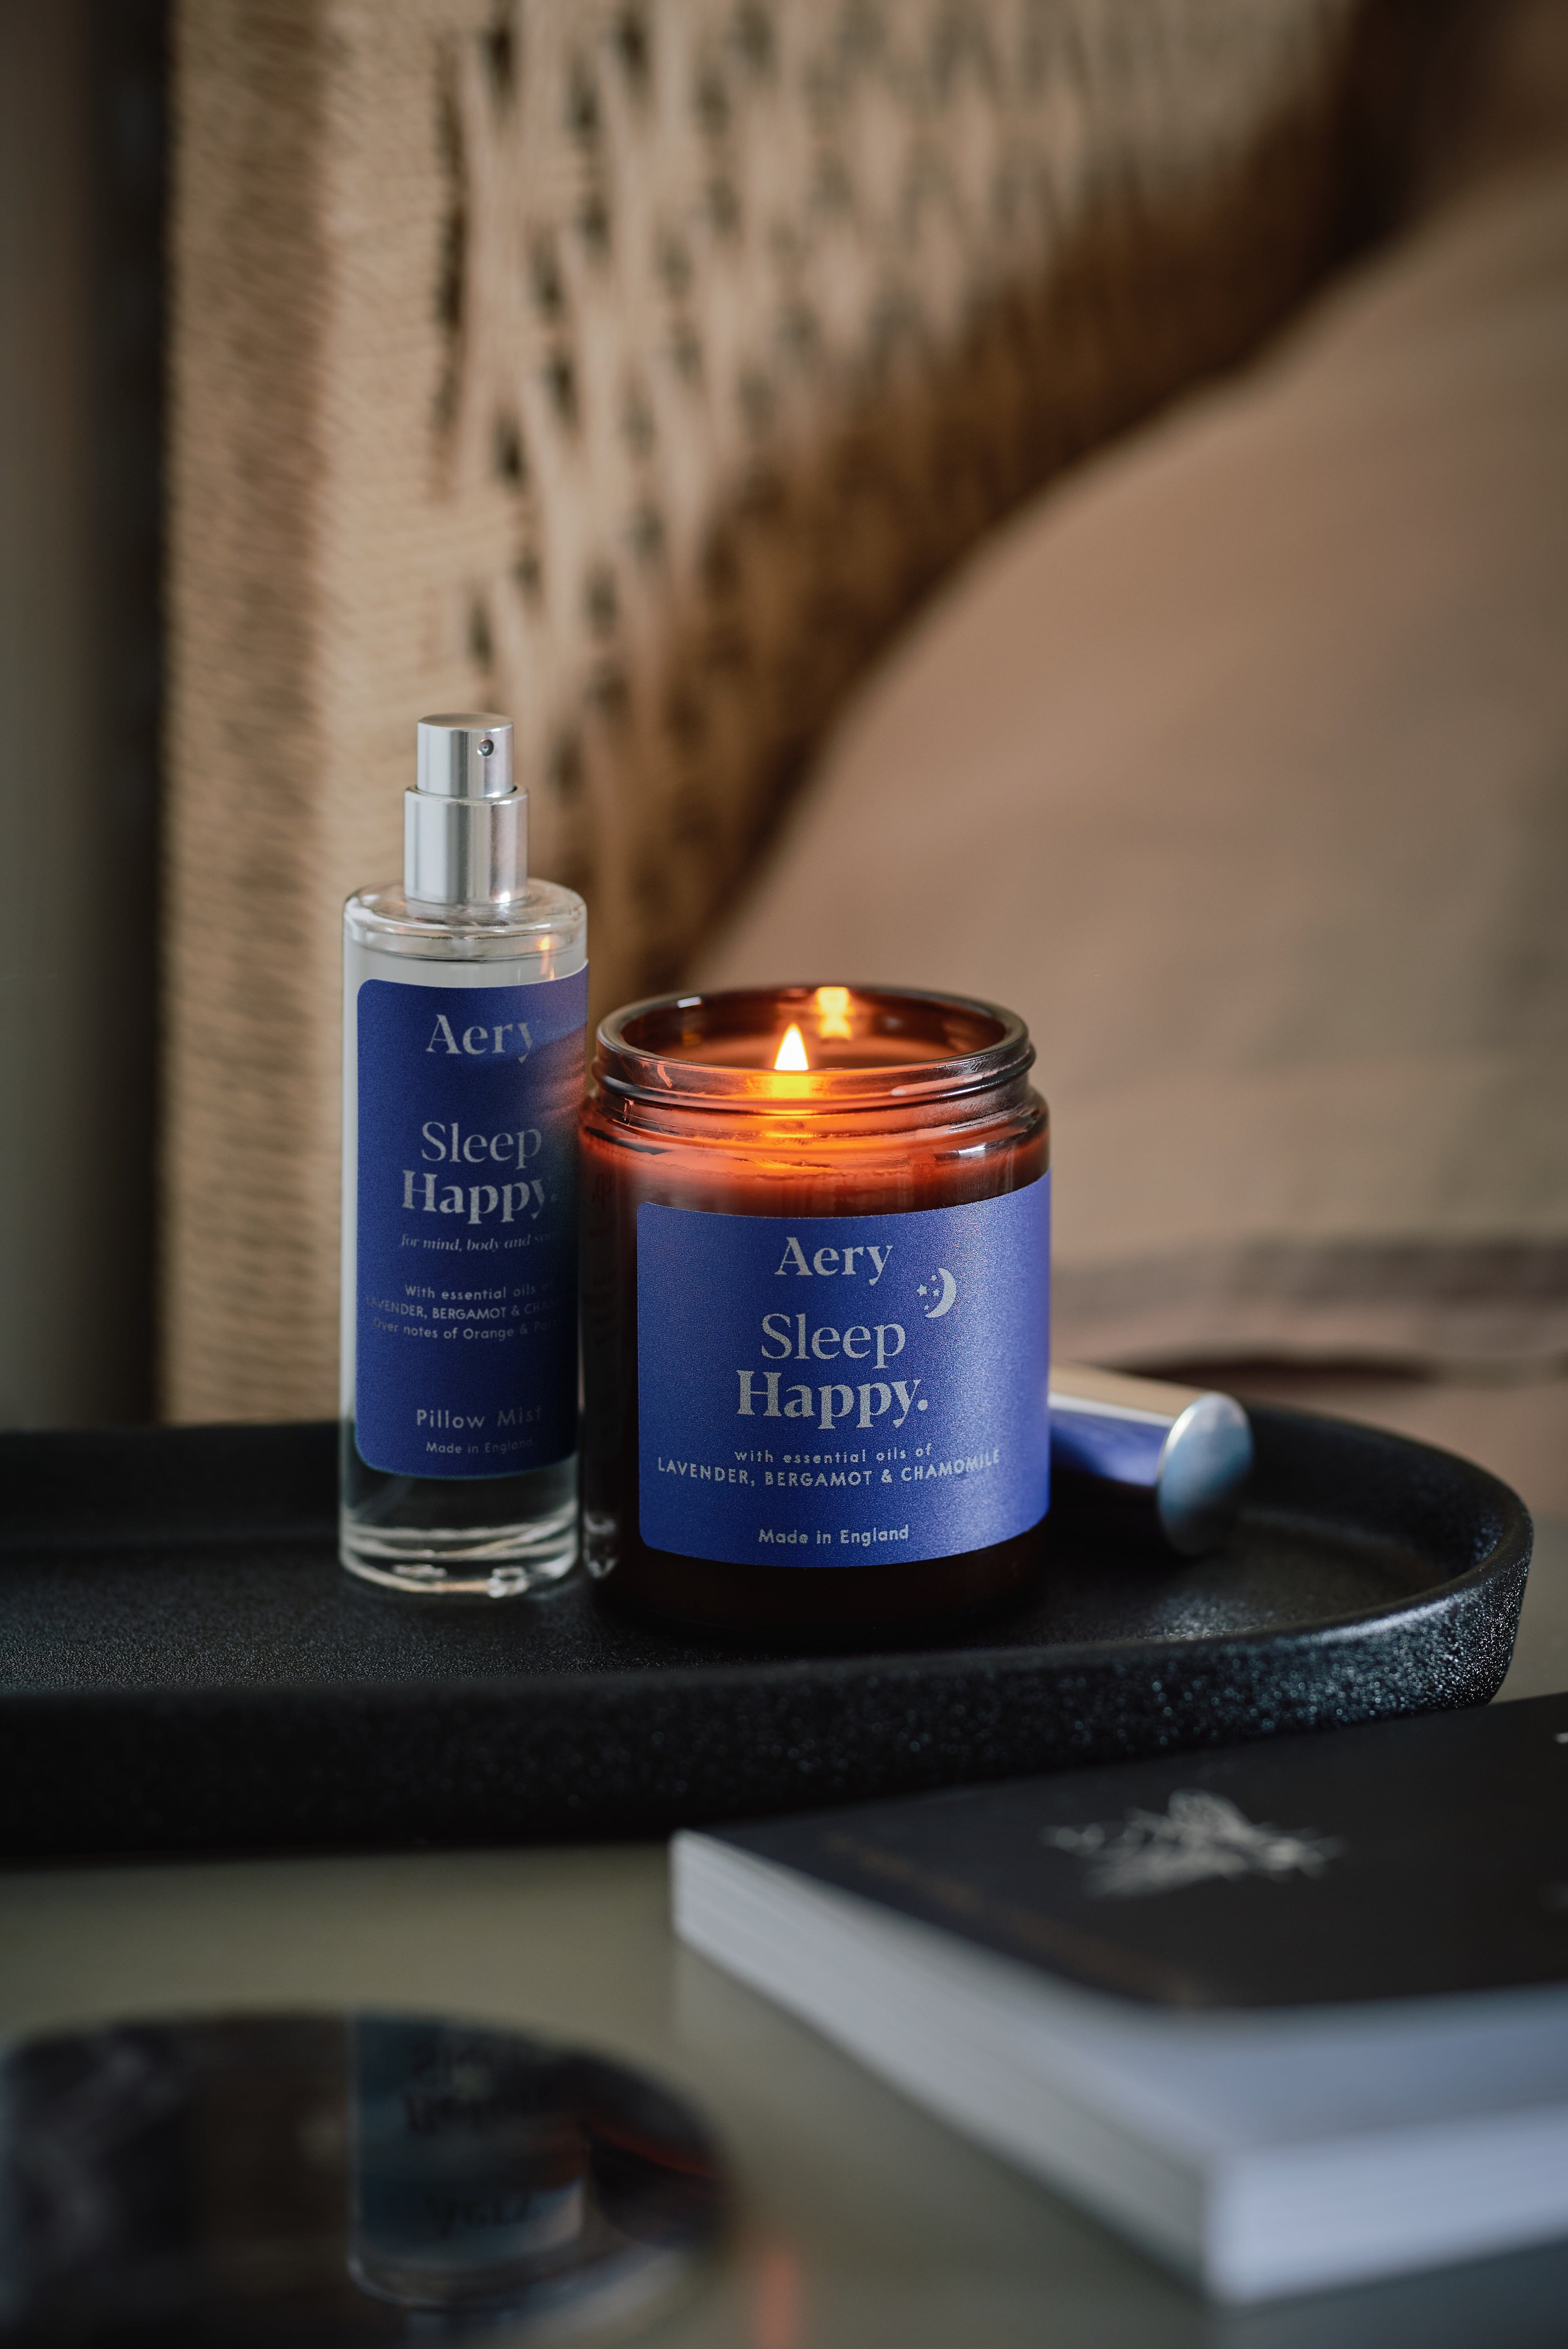 Blue Sleep Happy pillow mist by Aery displayed next to sleep happy jar candle on bedside table  